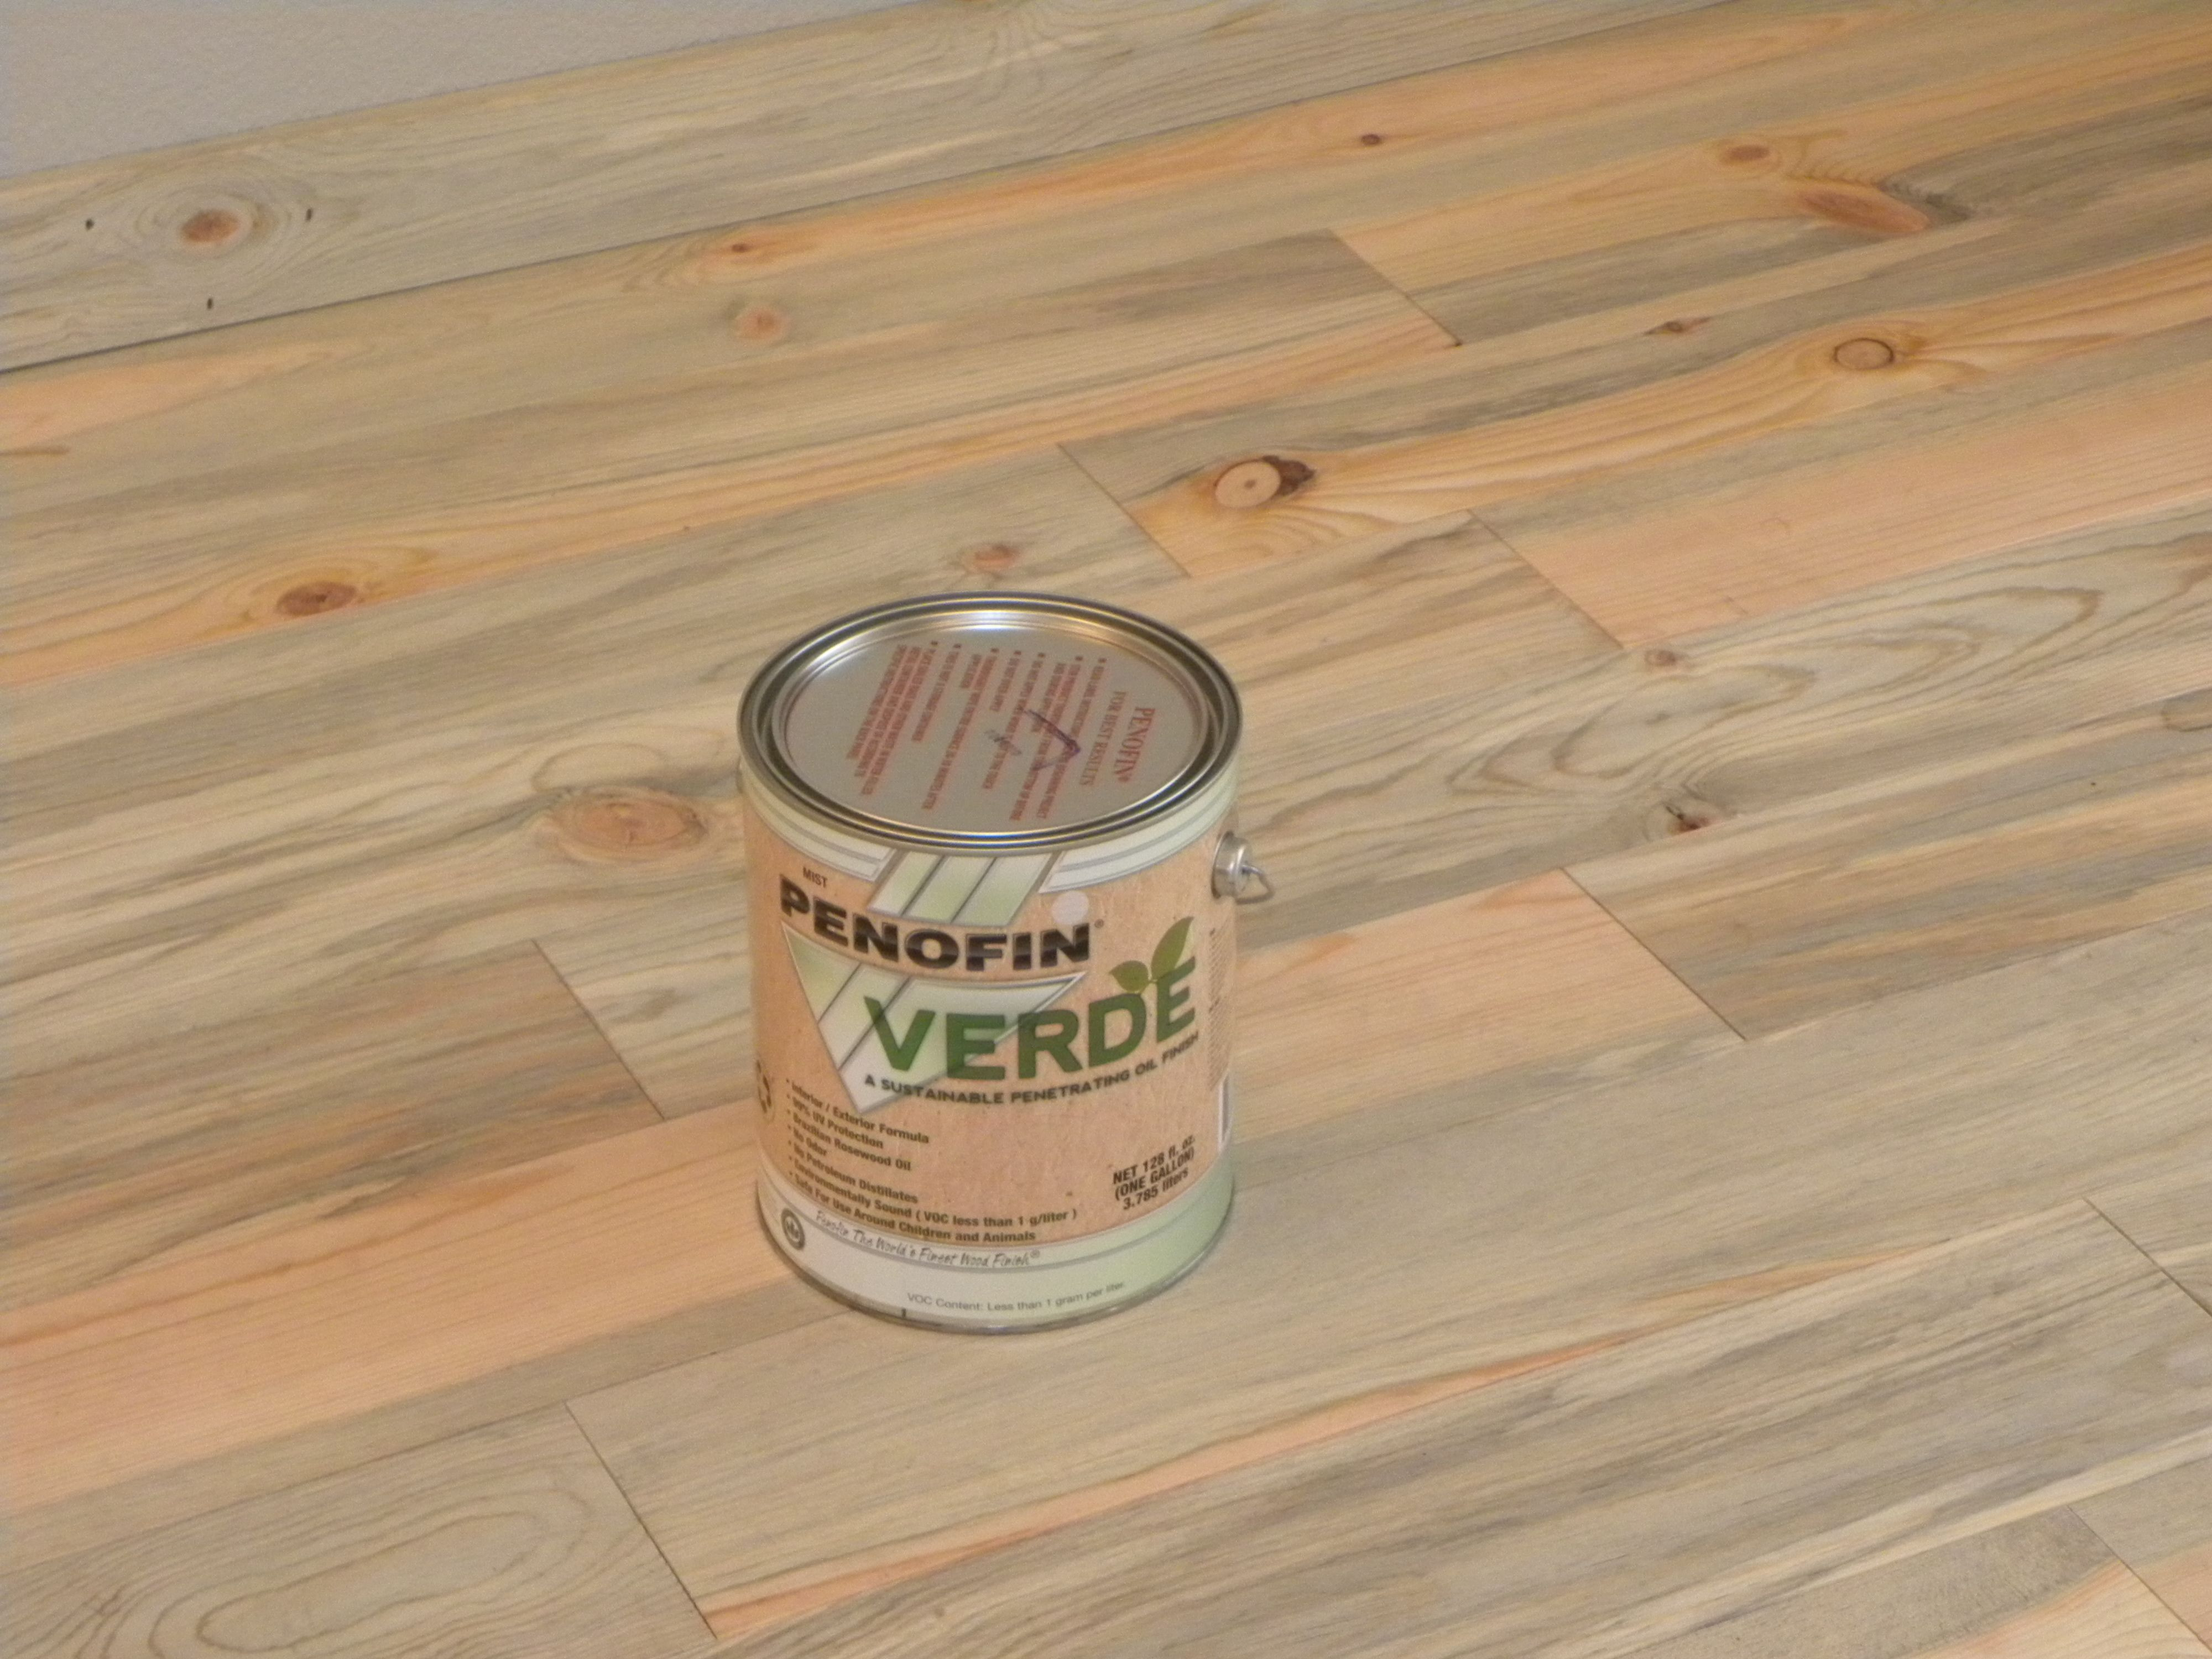 18 Nice Hardwood Flooring Contractors Seattle 2024 free download hardwood flooring contractors seattle of the new penofin verde whitewash mist is the perfect answer for with regard to the new penofin verde whitewash mist is the perfect answer for beetle k